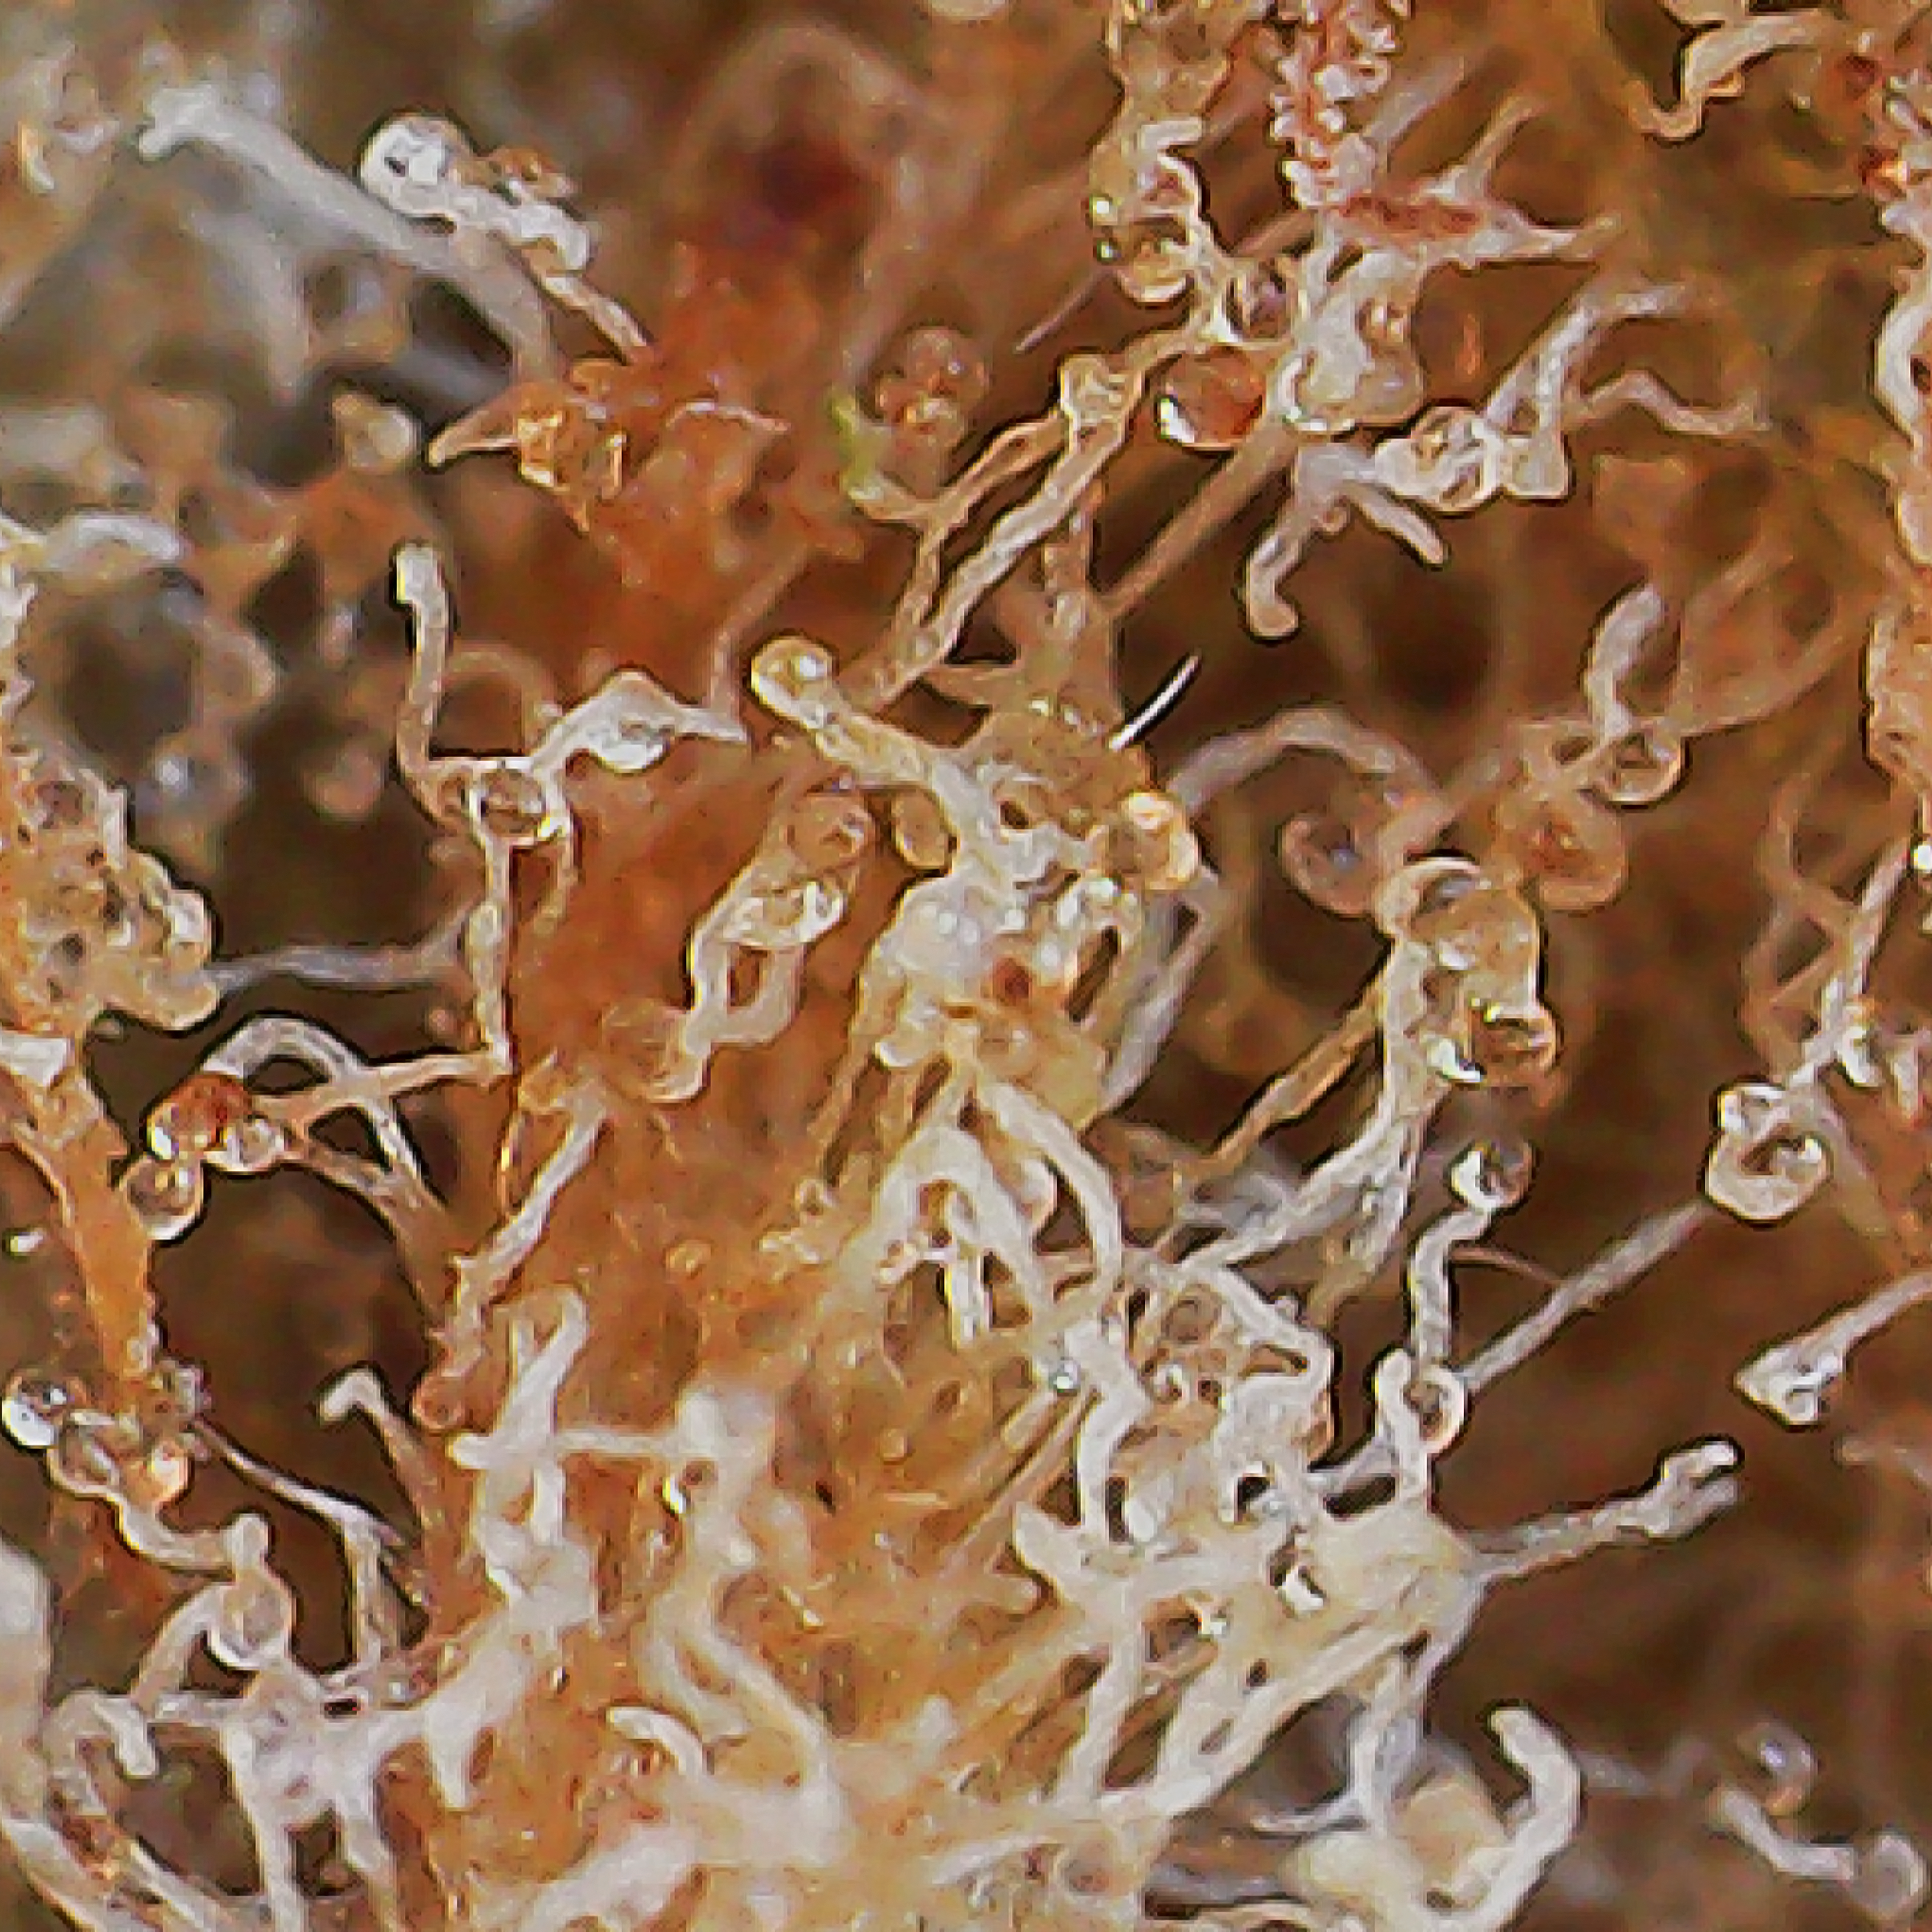 Royal City Cannabis - Orange Hill Special Trichome Image Photo